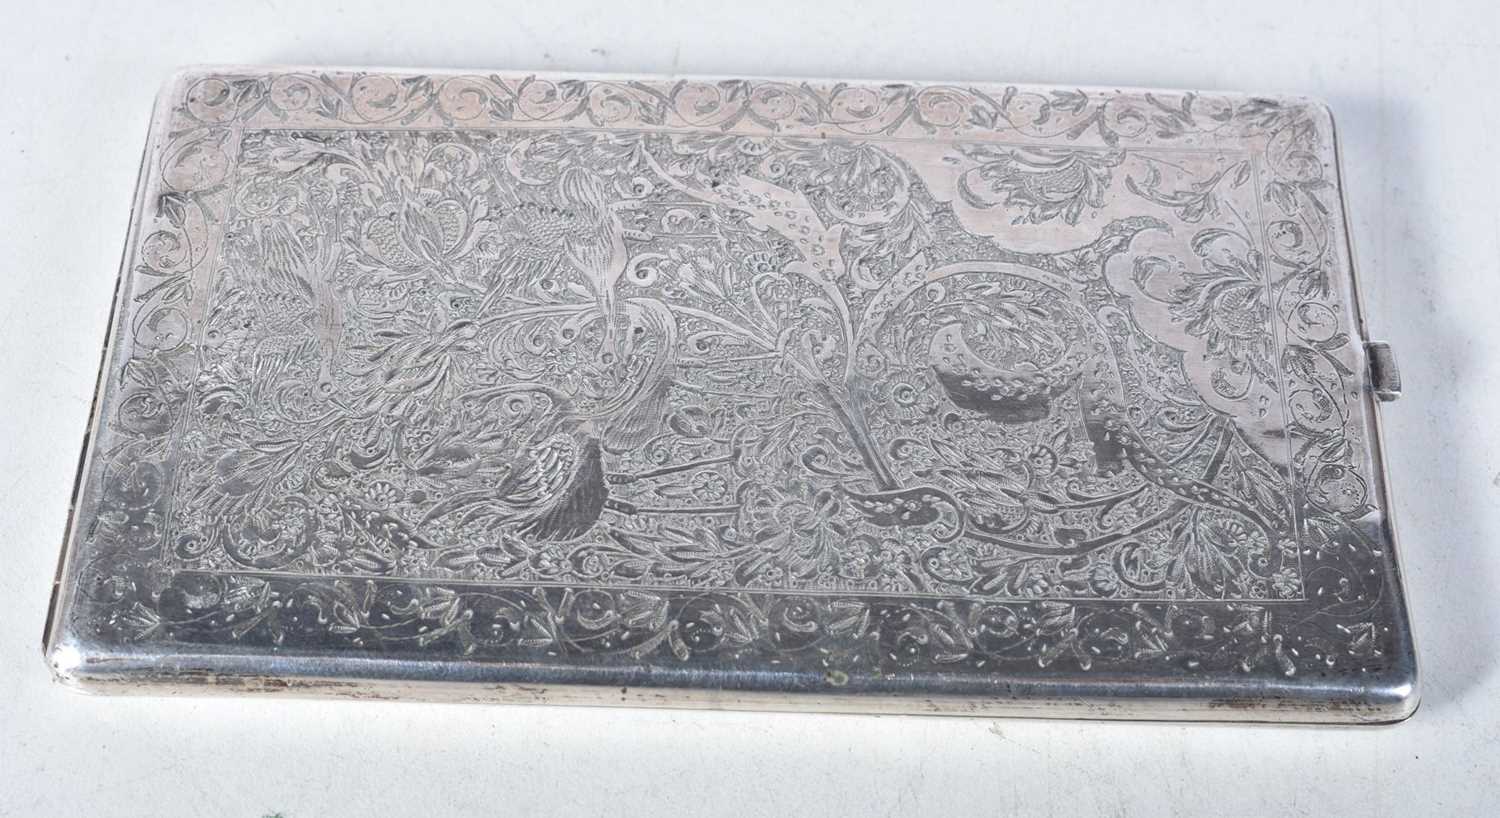 A Continental Silver Cigarette Case with Ornate Middle Eastern Engraved Design. XRF Tested for